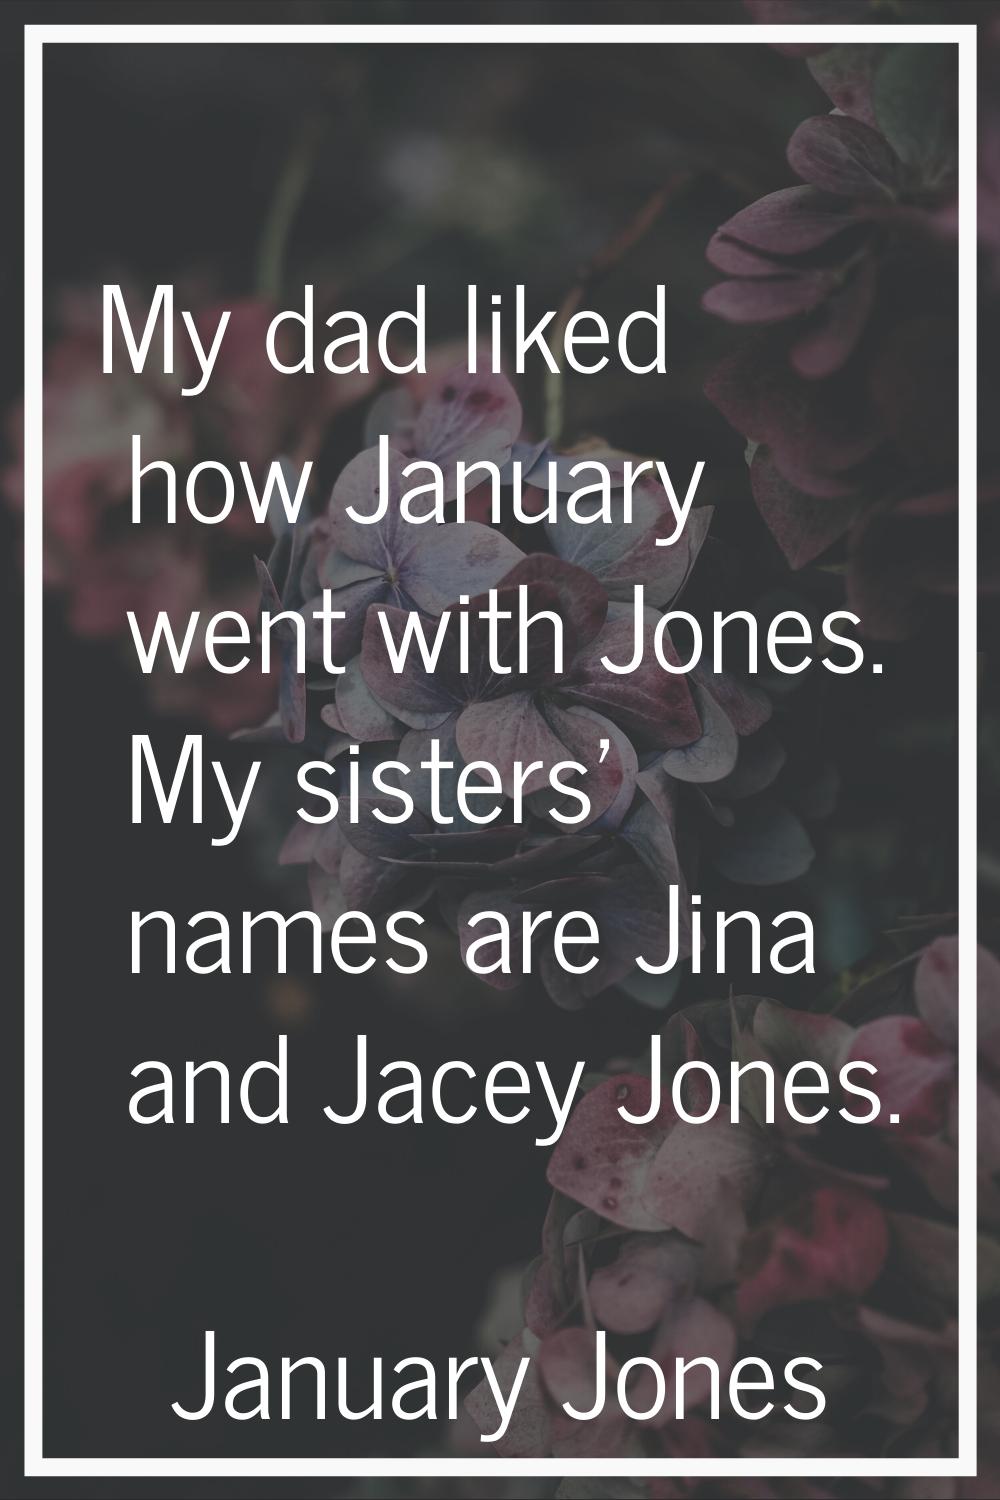 My dad liked how January went with Jones. My sisters' names are Jina and Jacey Jones.